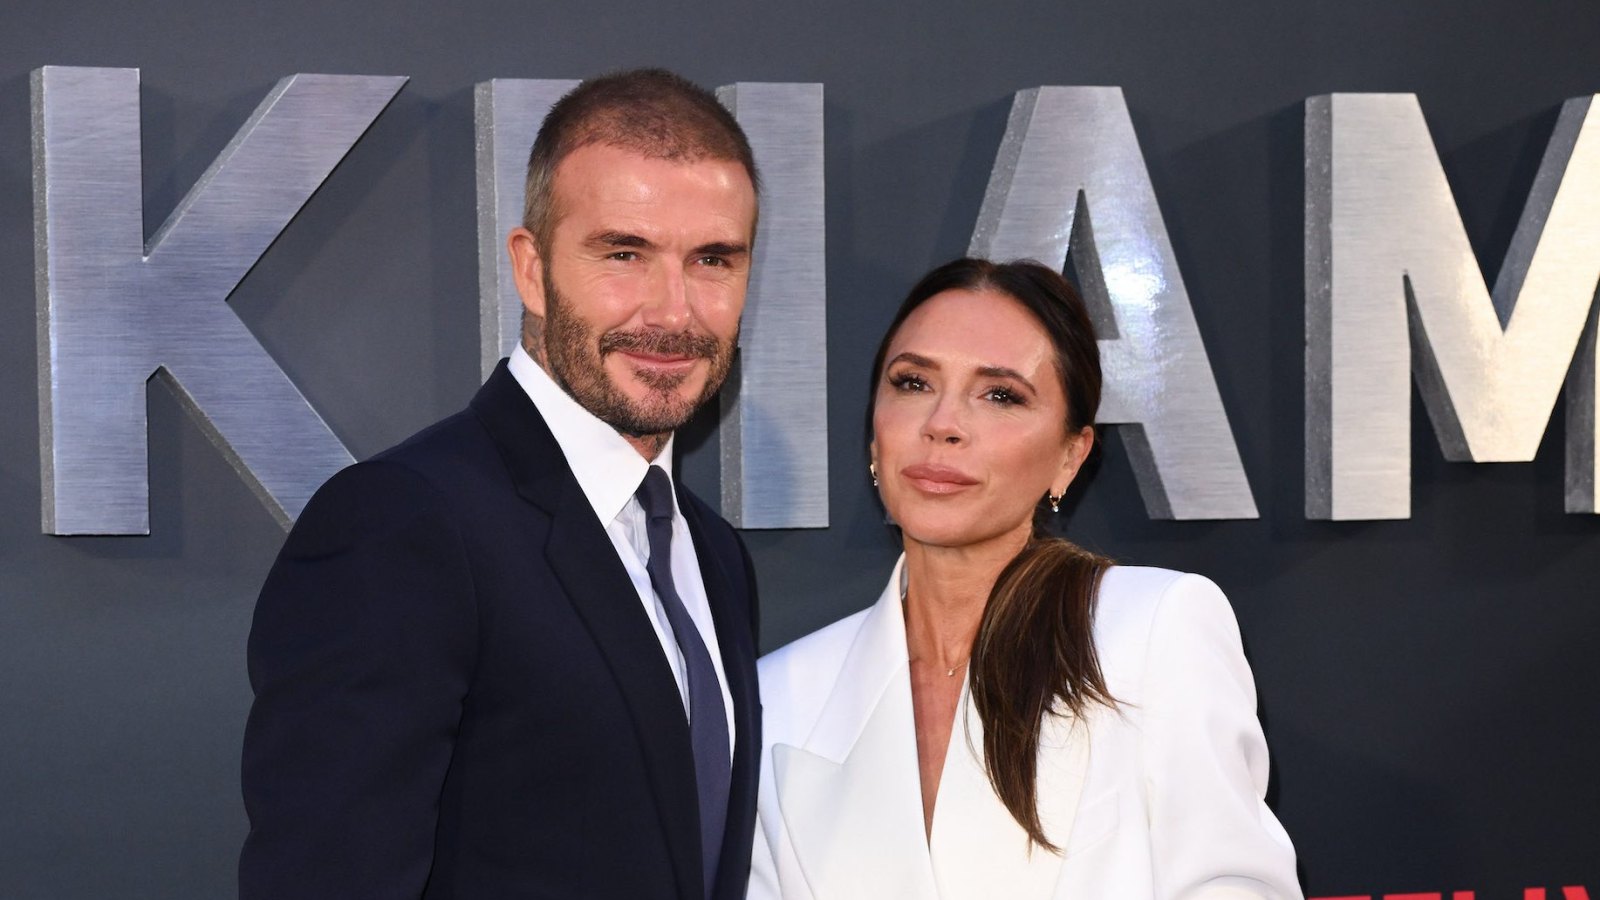 David Beckham Calls Out Victoria for Saying She Was 'Working Class'